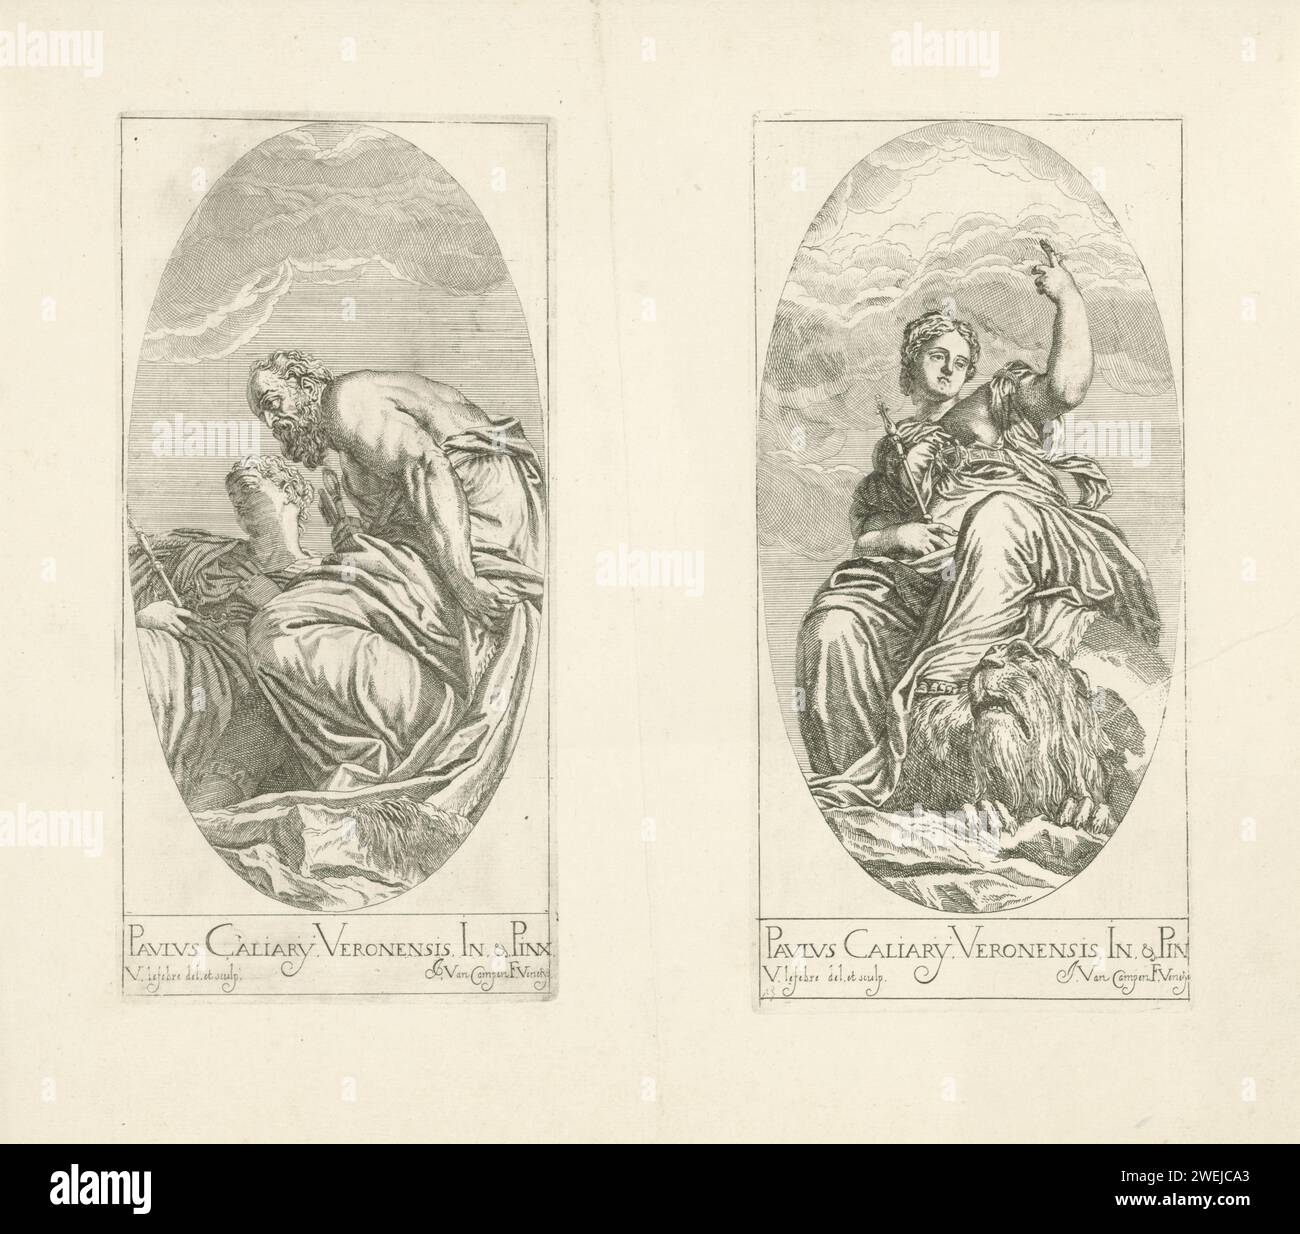 Youth and old age / Venice sitting on a Globe, Valentin Lefèbvre, After Paolo Veronese, After Giambattista Zelotti, 1682 print Two performances on a leaf, printed from two plates. Left: the Personified Youth (with scepter) and old age (with keys). Right: the personification of the city of Venice sitting with a scepter in her hand on a globe, her foot is on the back of a lion lying in front of her. The prints are part of a 53-part series according to paintings by Titian and Veronese.  paper etching Youth, Adolescence, 'Iuventus'; 'Adolescenza', 'GioventÃ¹' (Ripa). Old Age, 'Senectus'; 'Vecchiez Stock Photo